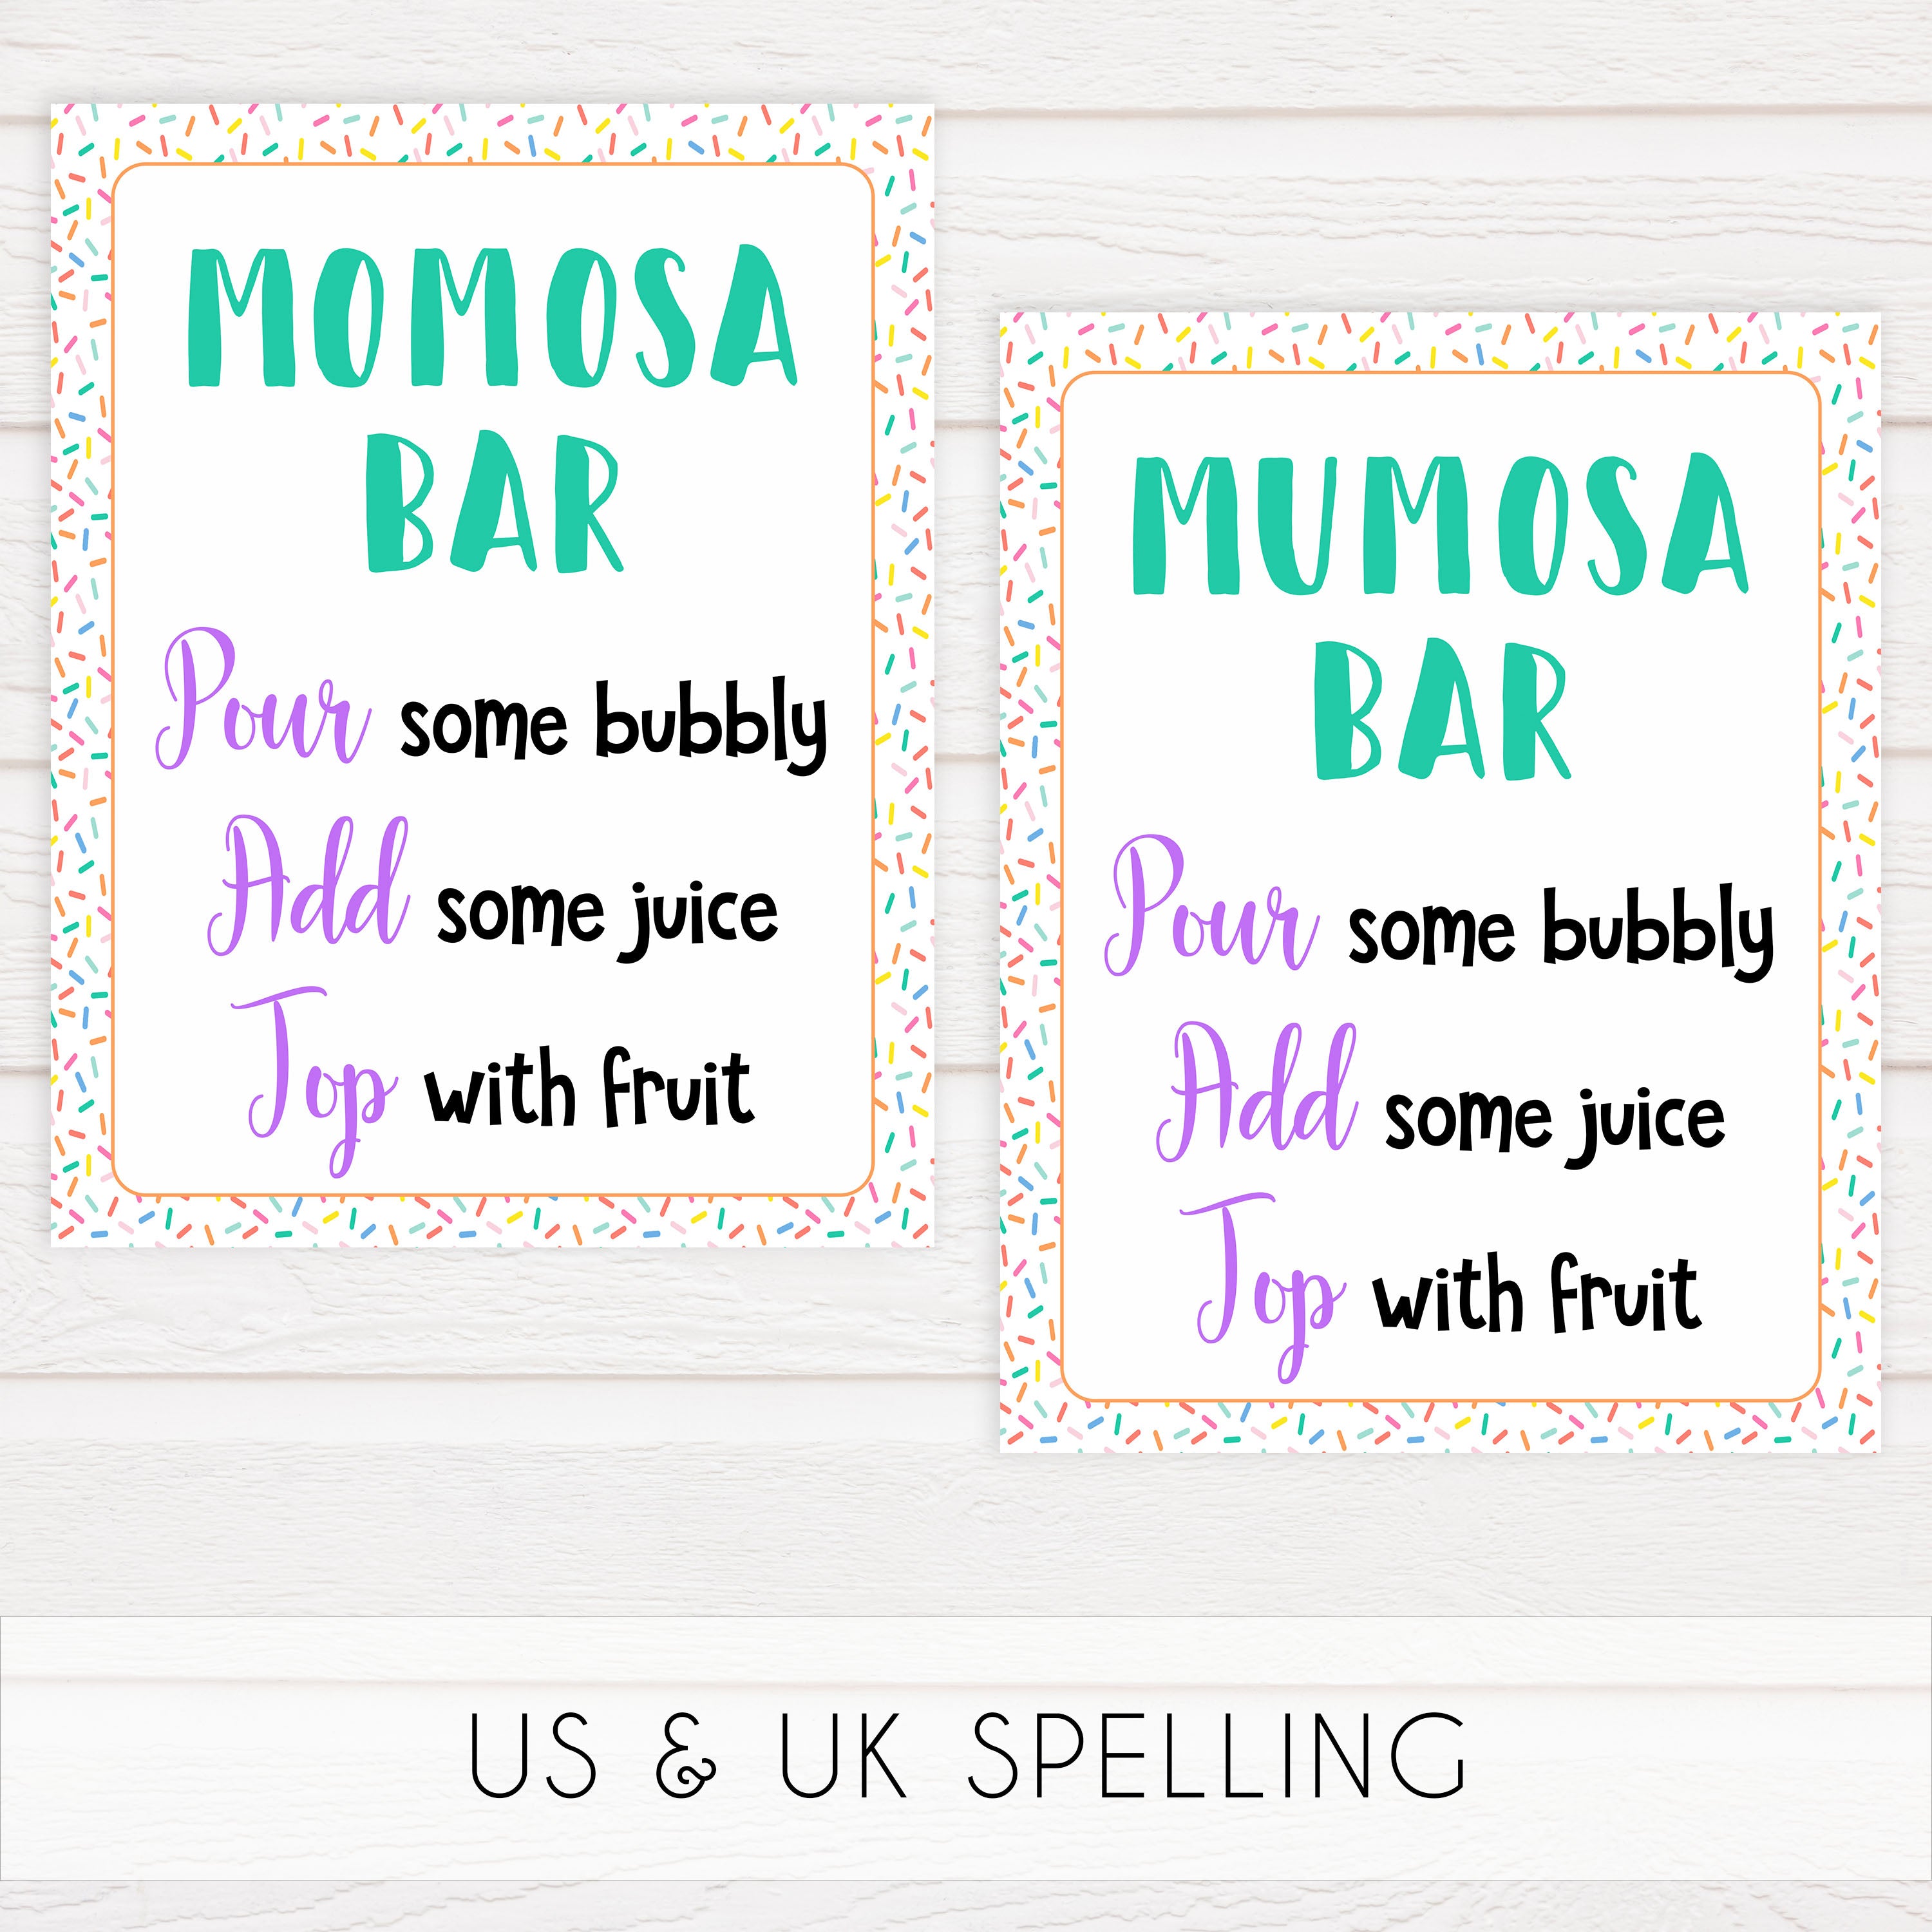 8 baby tables signs, baby table decor, Baby sprinkle baby decor, printable baby table signs, printable baby decor, baby sprinkle table signs, fun baby signs, baby sprinkle fun baby table signs